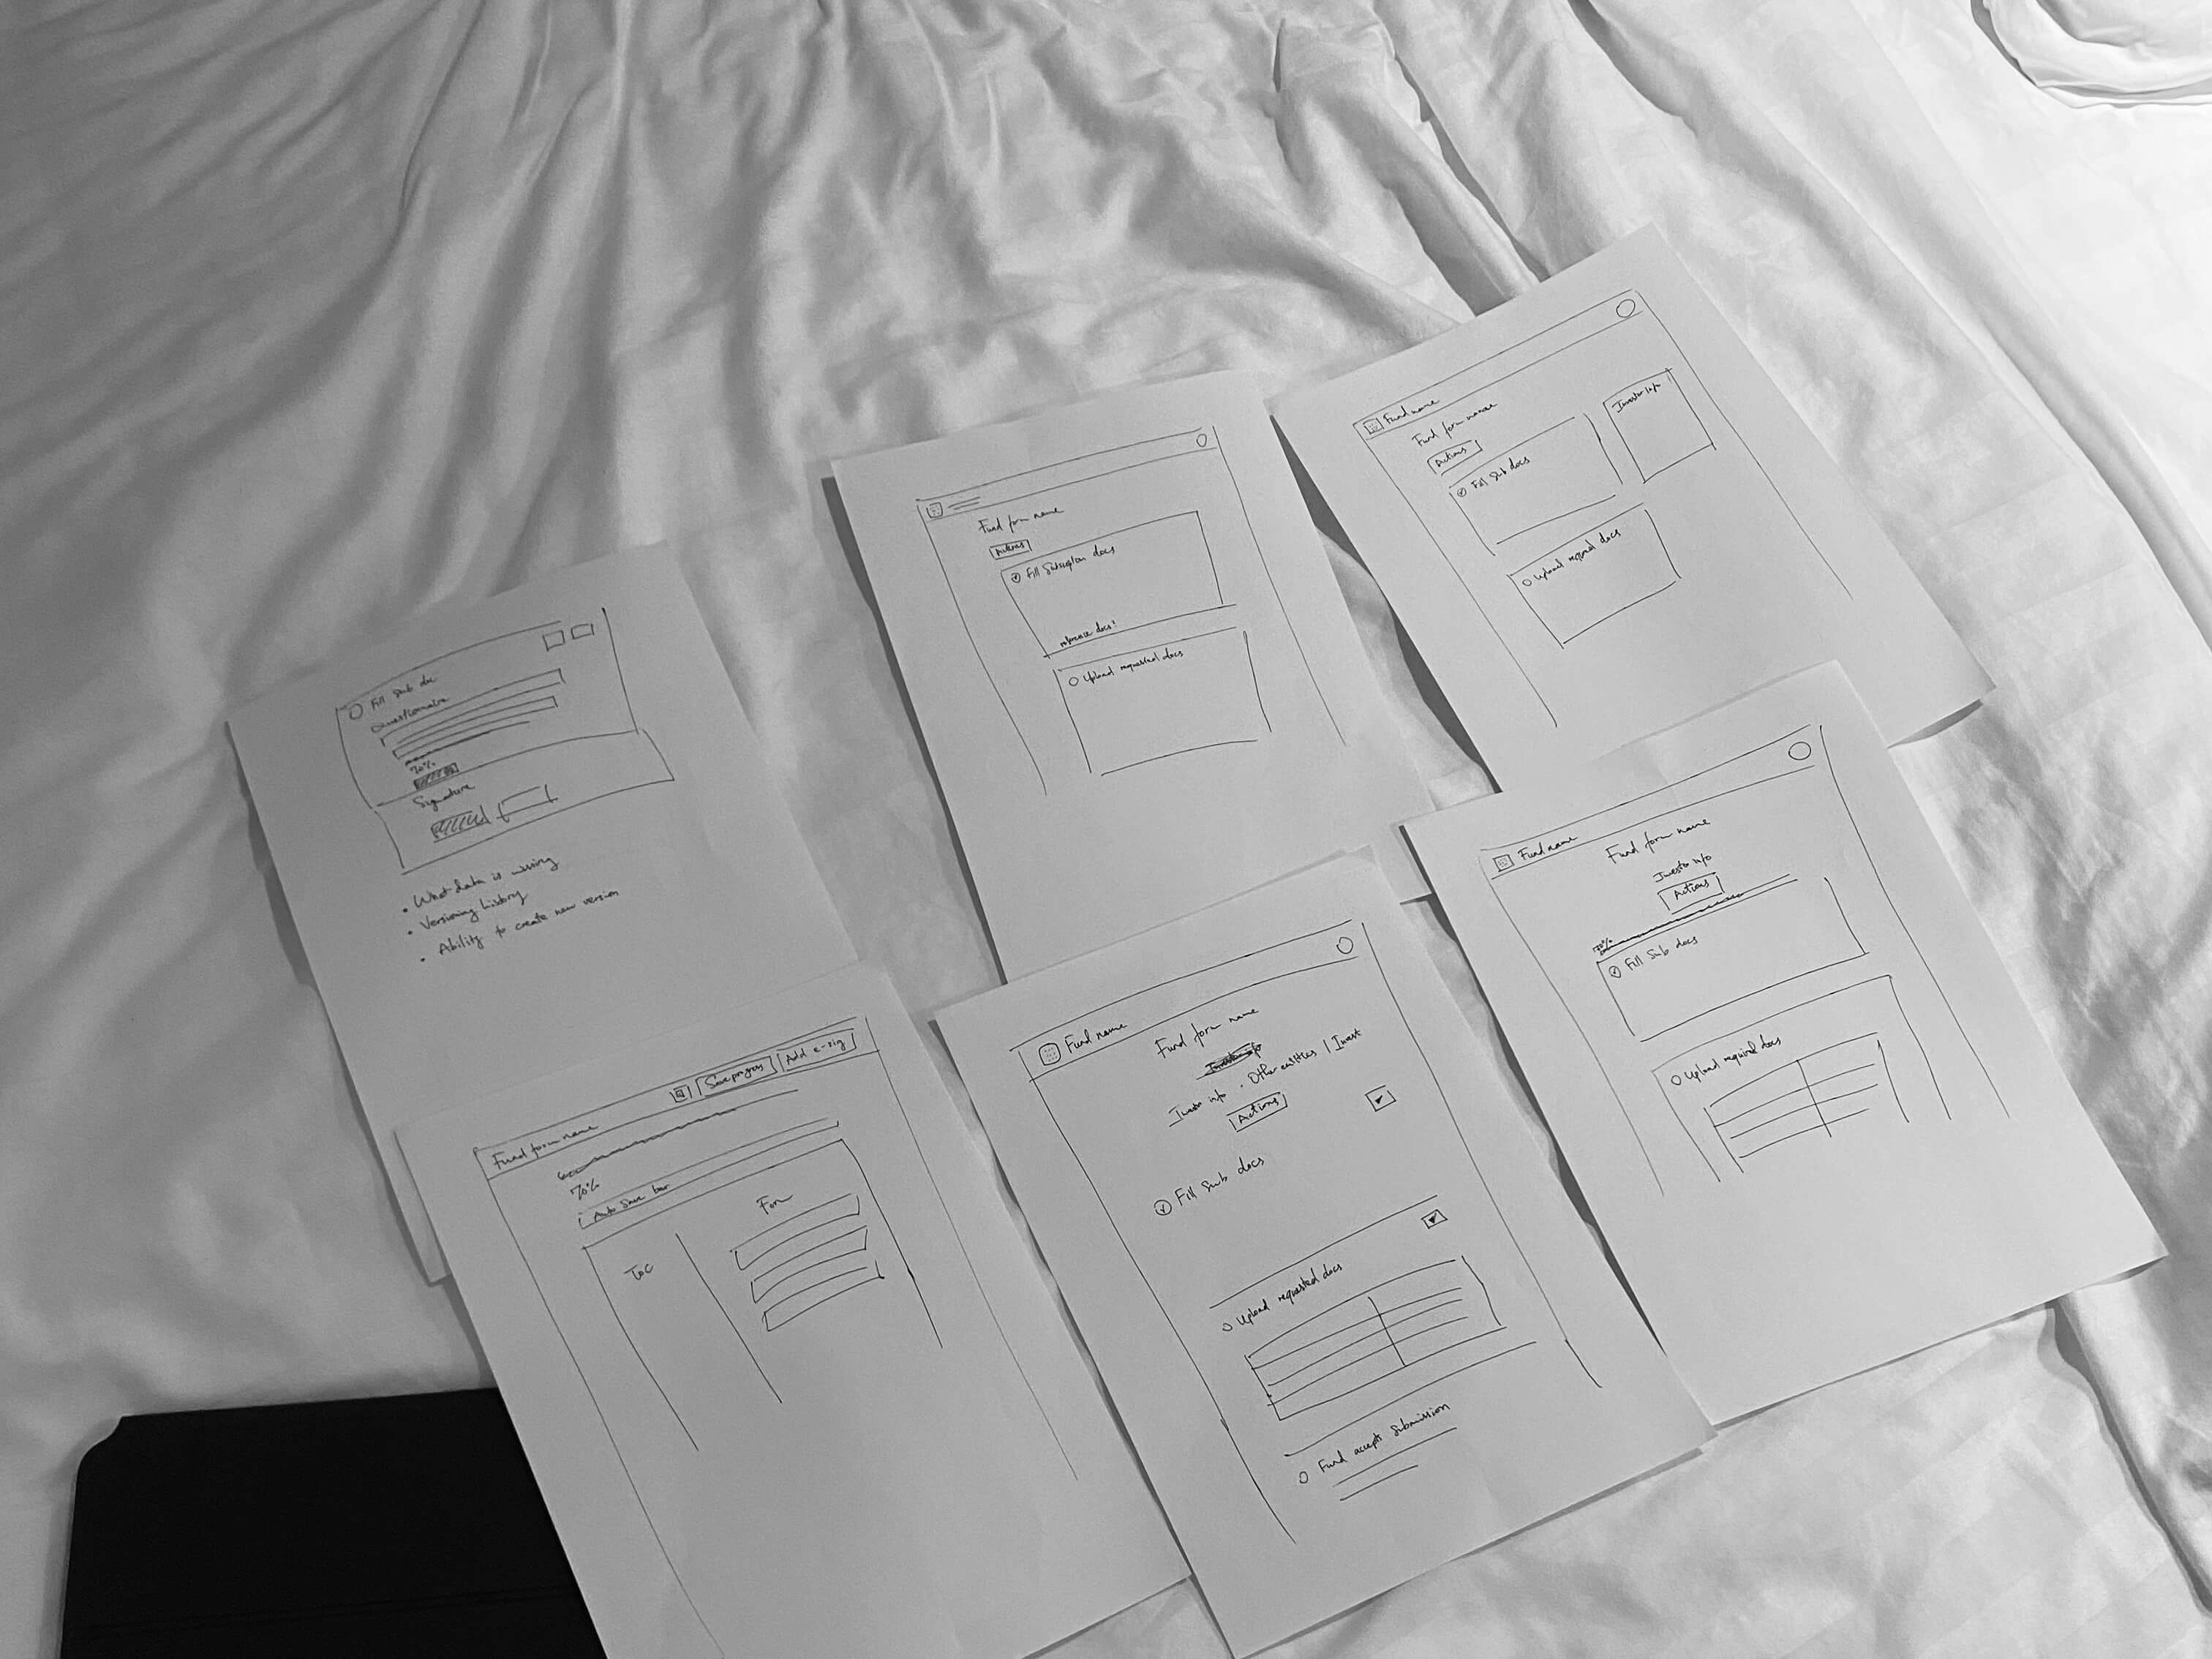 Wireframes to sketch different layout options for a summary page